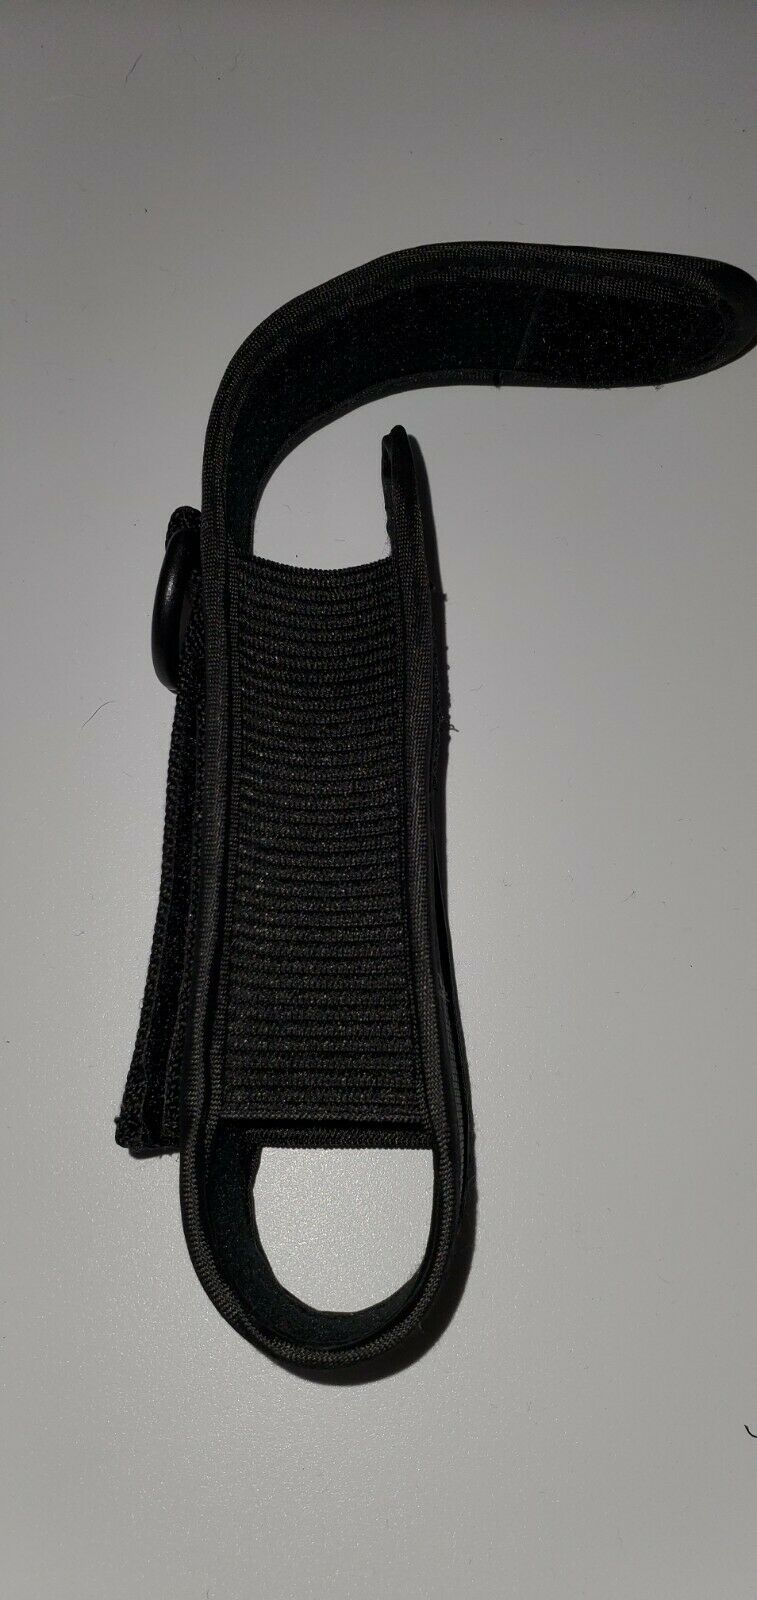 LUMINTOP FW3A, FW1A, FW1A, GT MICRO NYLON HOLSTER NEW USA DIRECT!